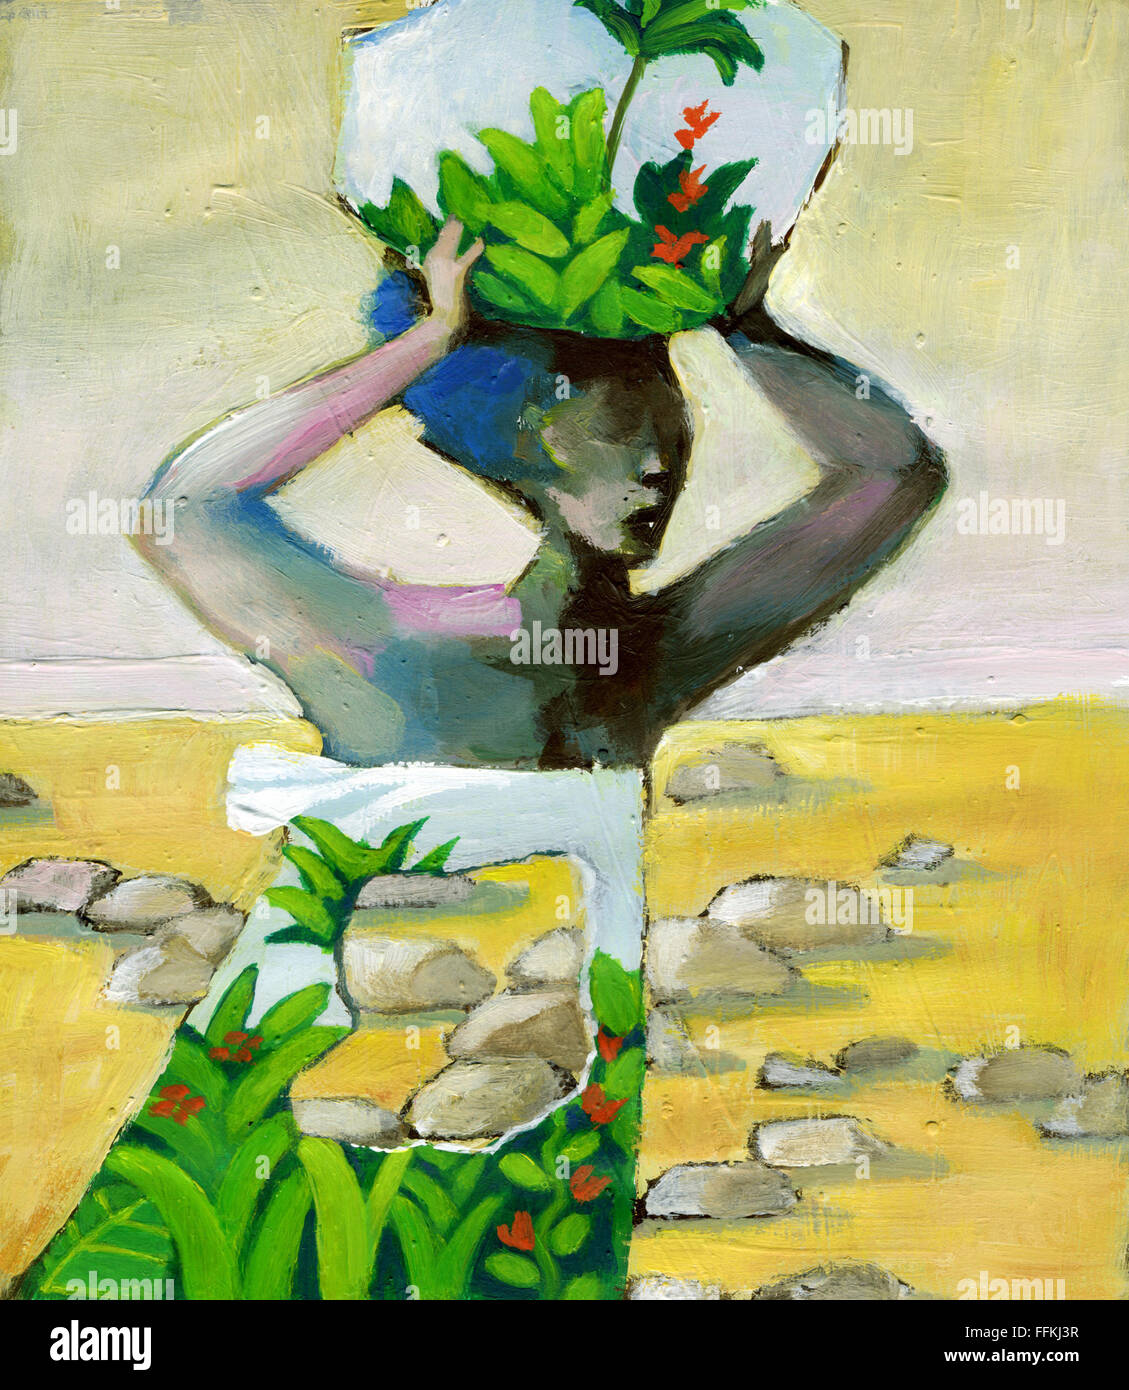 A woman carrying on her head the image of the fertile land that has lost Stock Photo